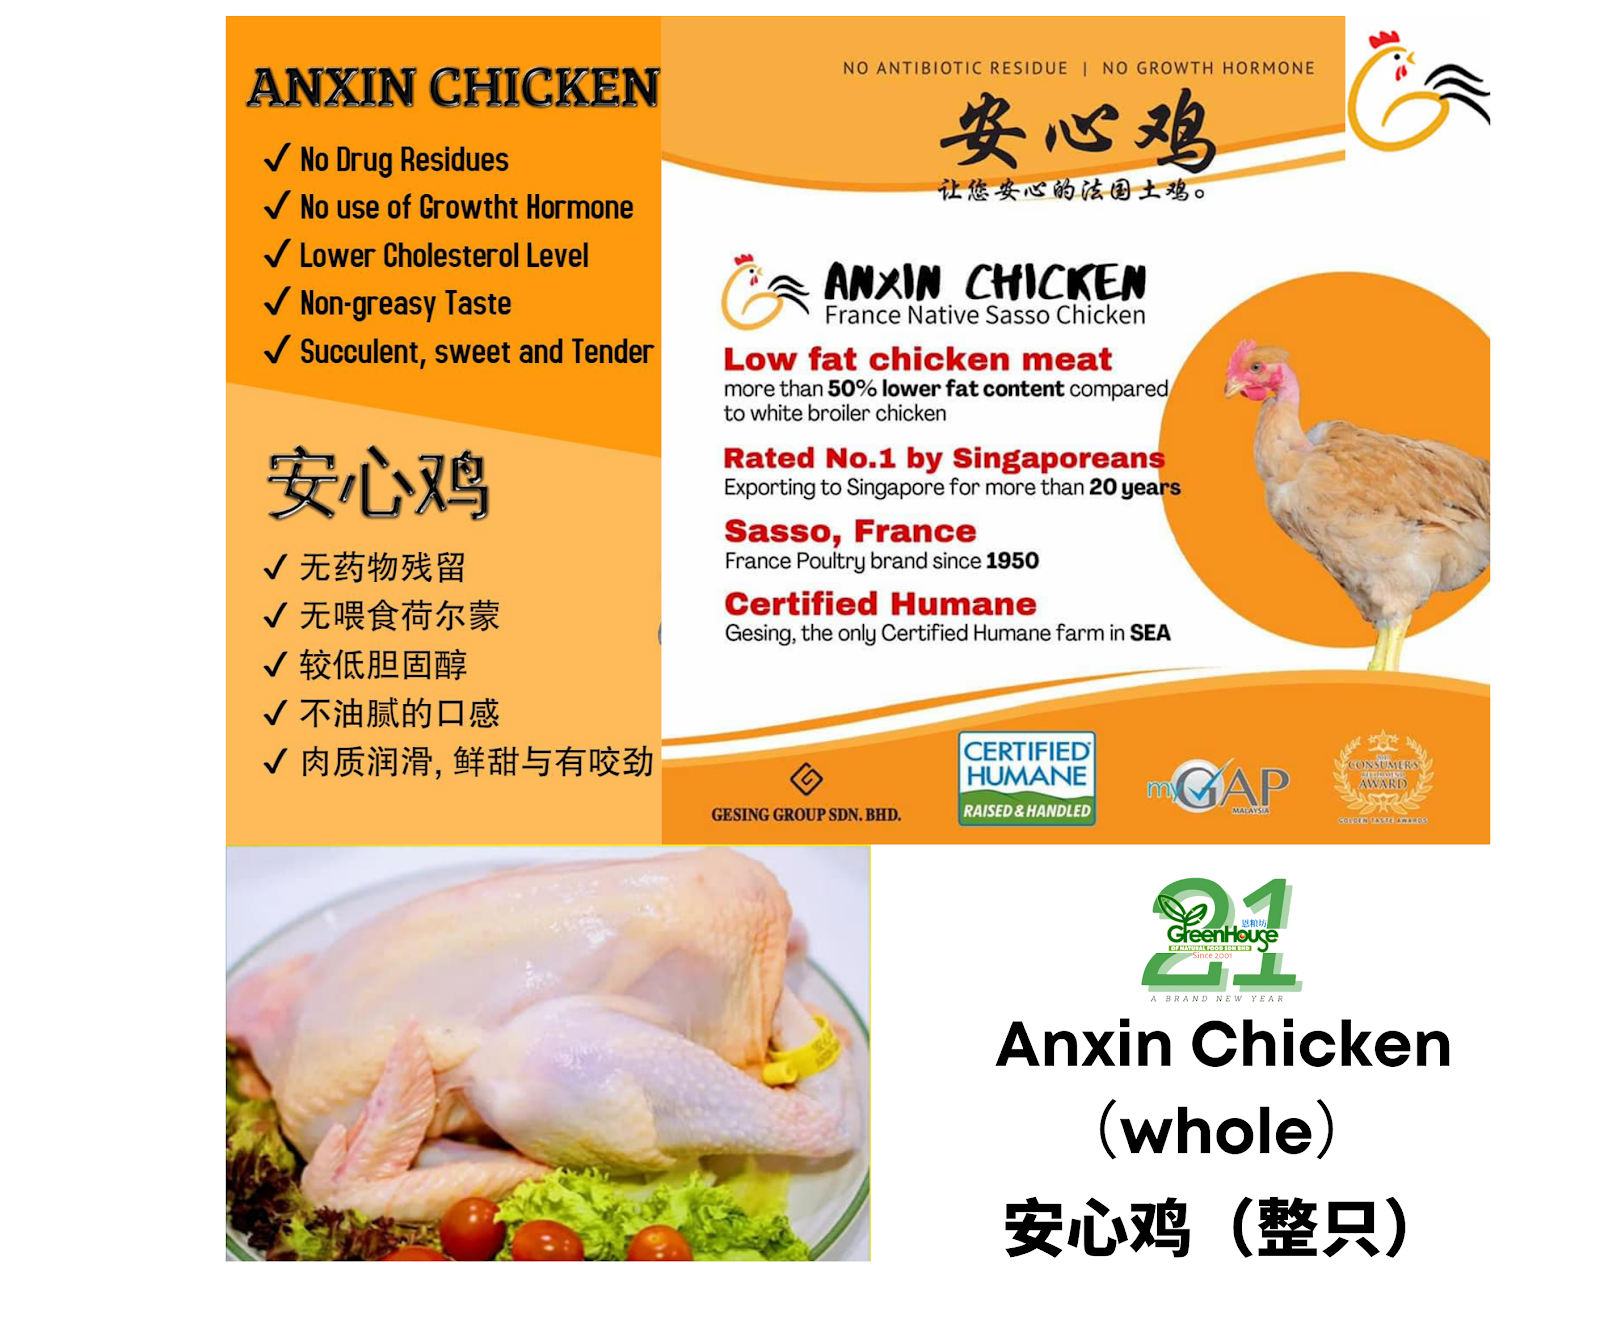 ANXIN CHICKEN (WHOLE)